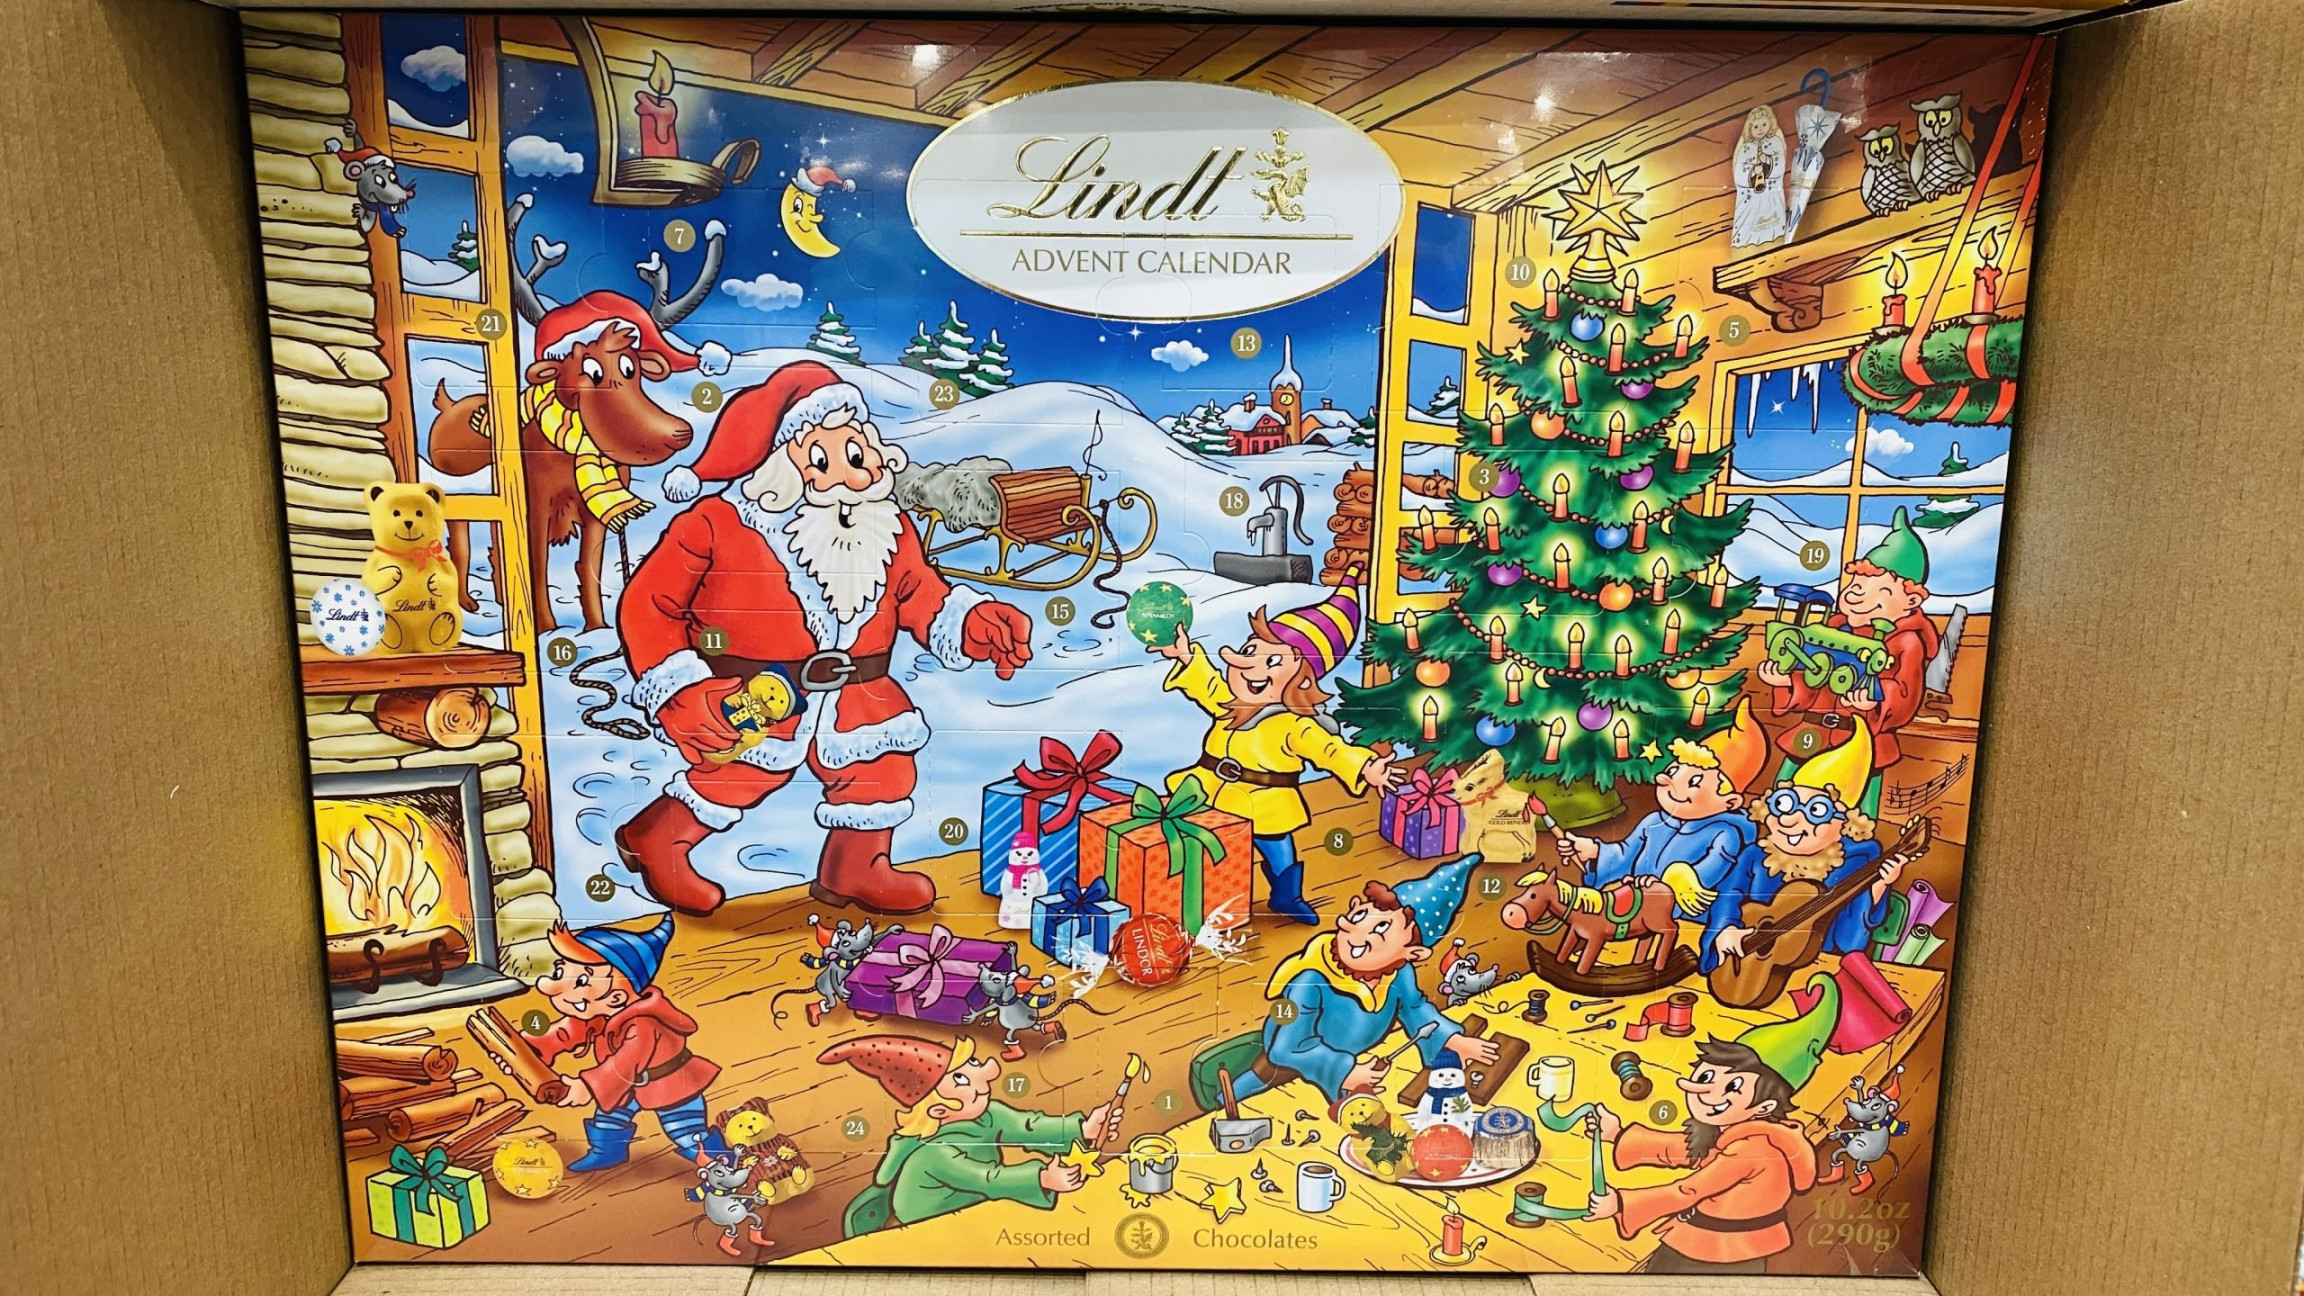 Costco Is Selling A Lindt Advent Calendar Filled With Assorted